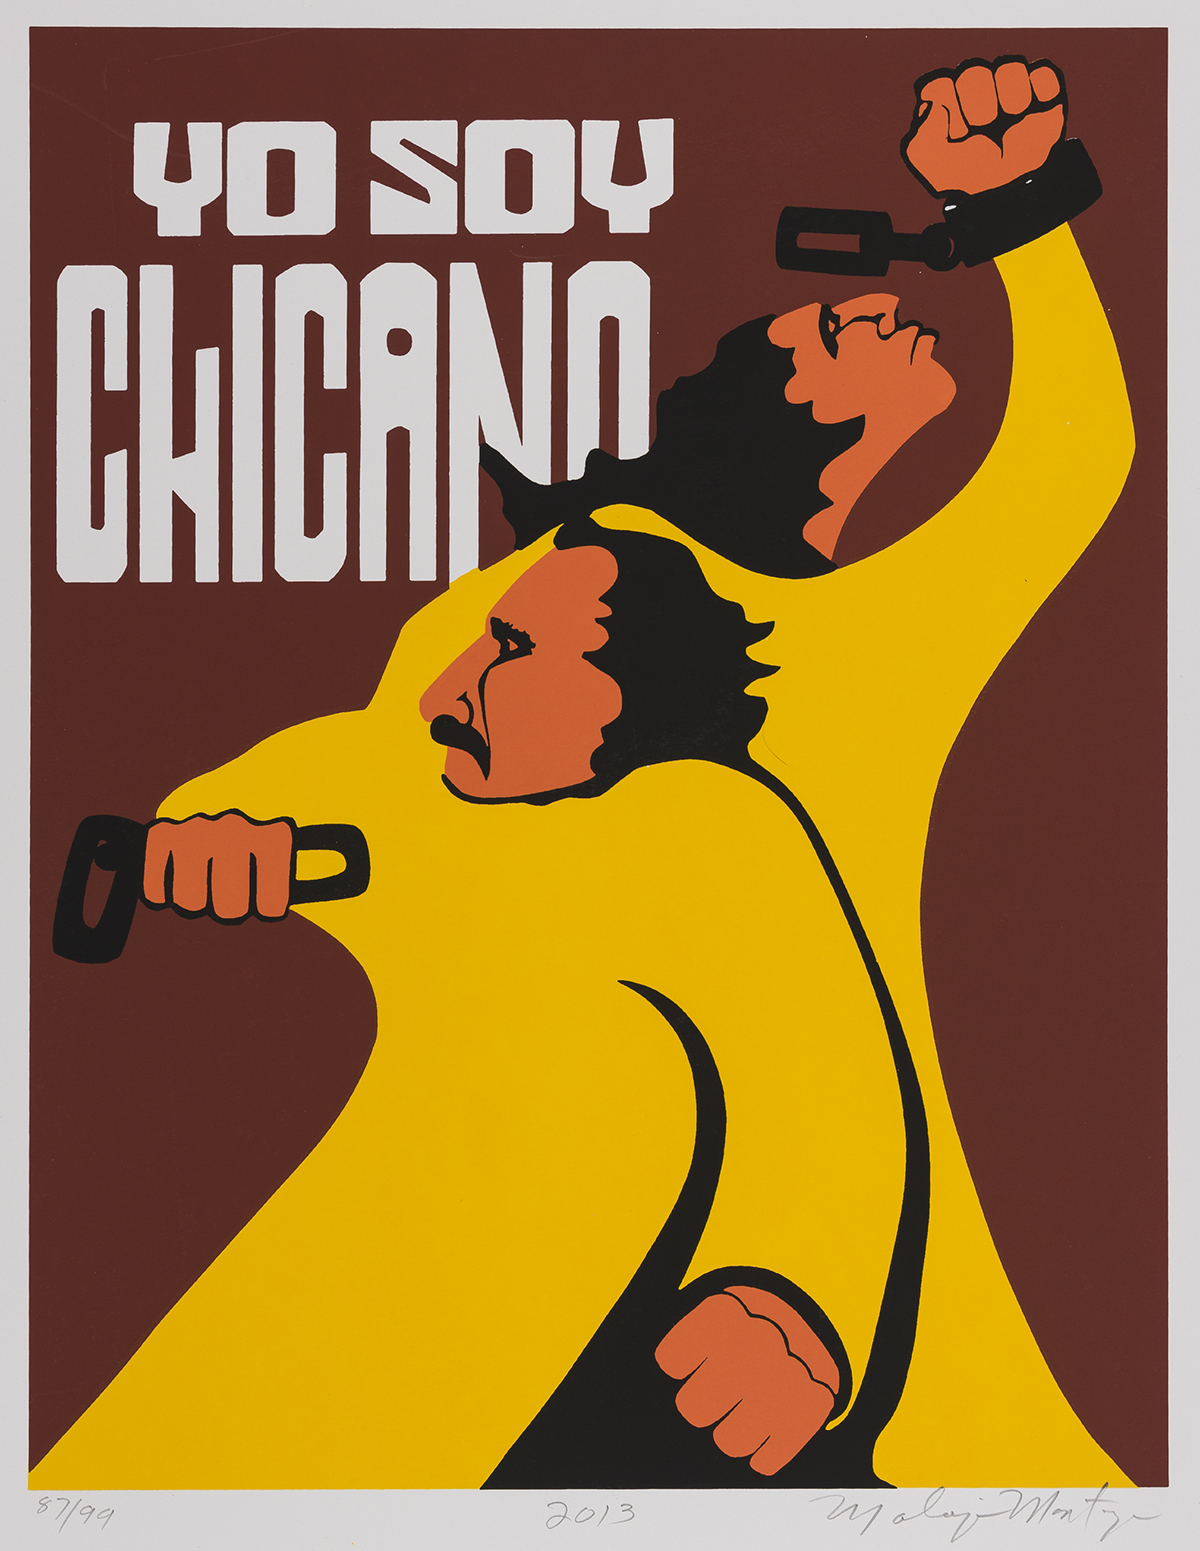 Screenprint of brown figures in yellow with words "Yo Soy Chicano."